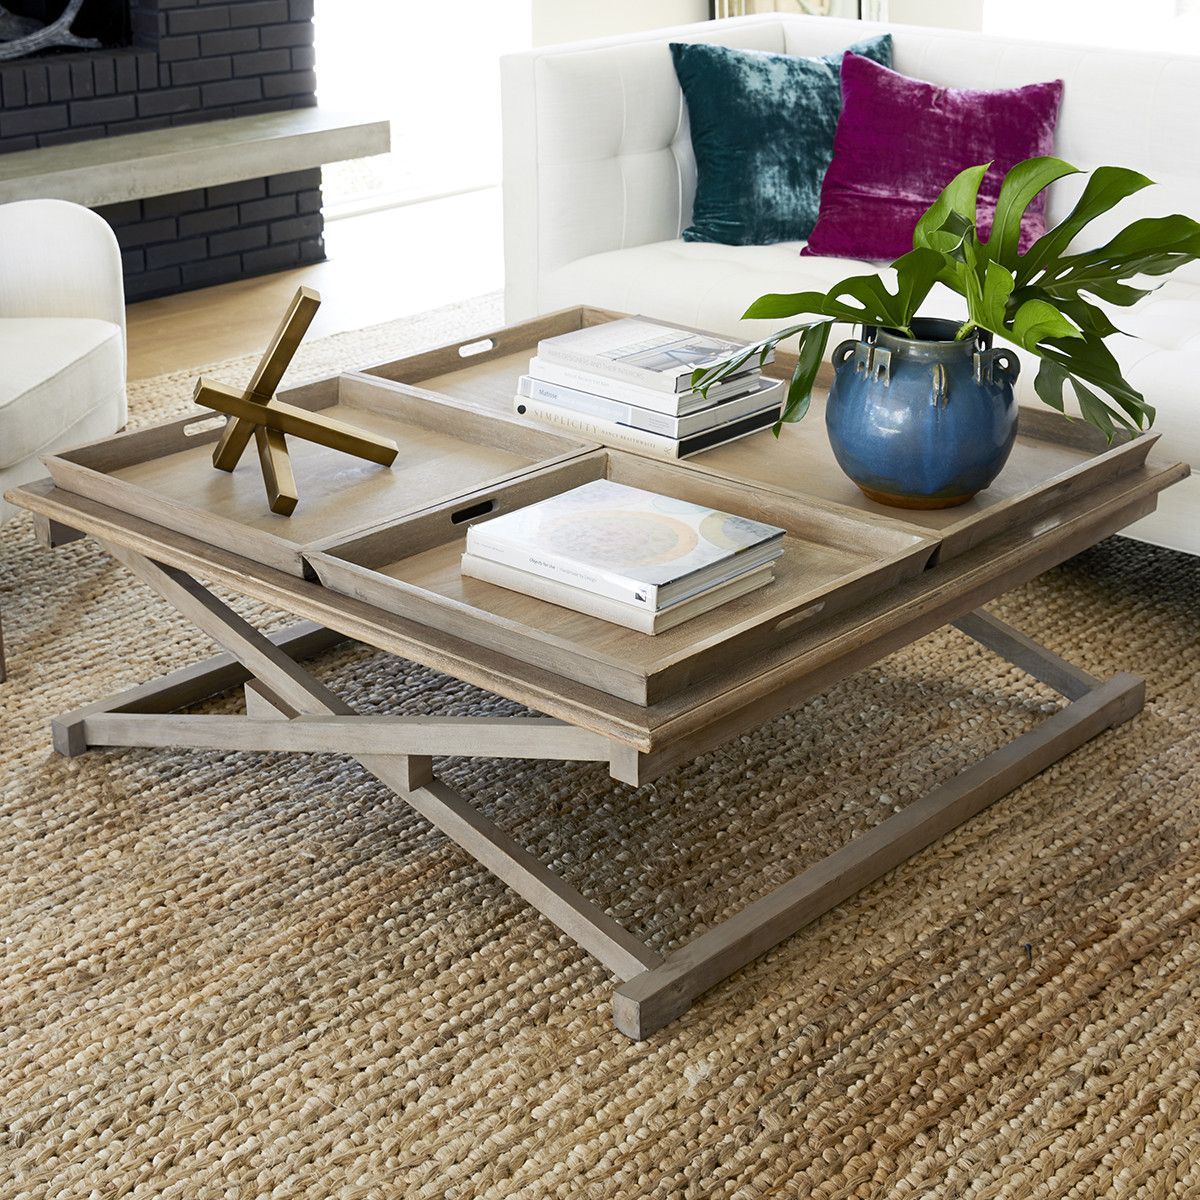 30+ Coffee Table Tray Ideas With Regard To Coffee Tables With Trays (View 5 of 15)